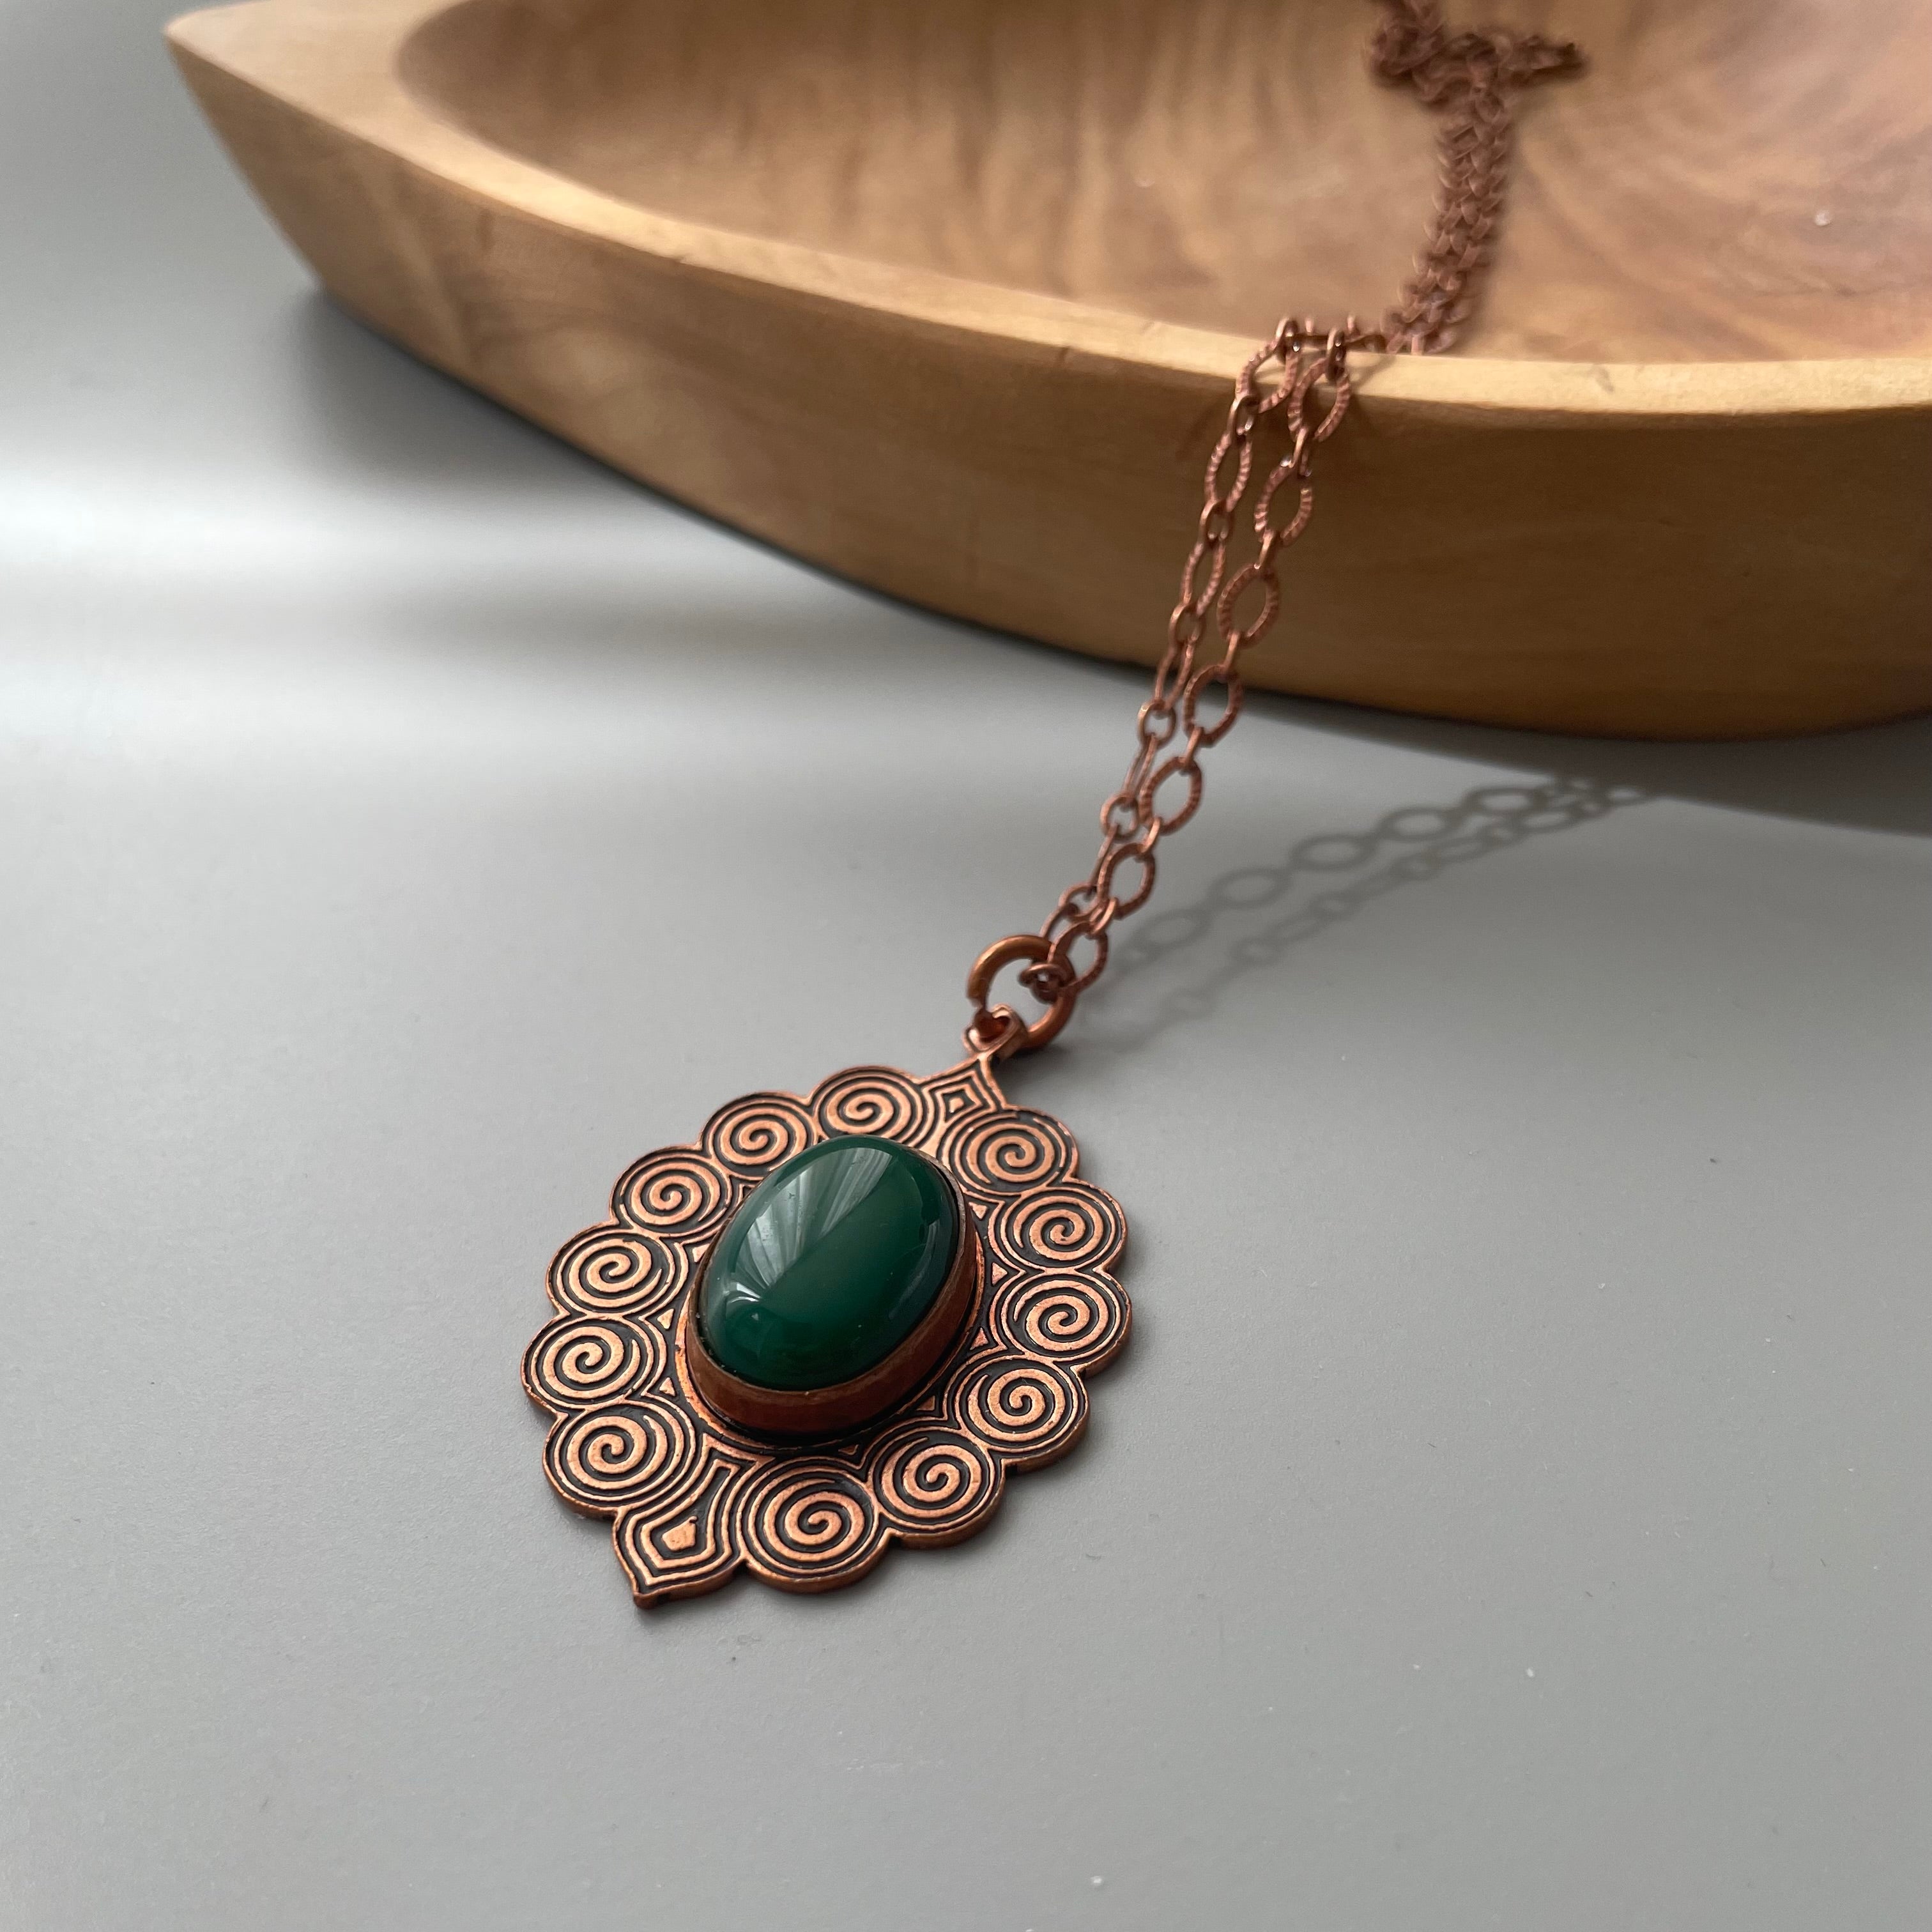 Handmade Copper Necklace with Gemstone